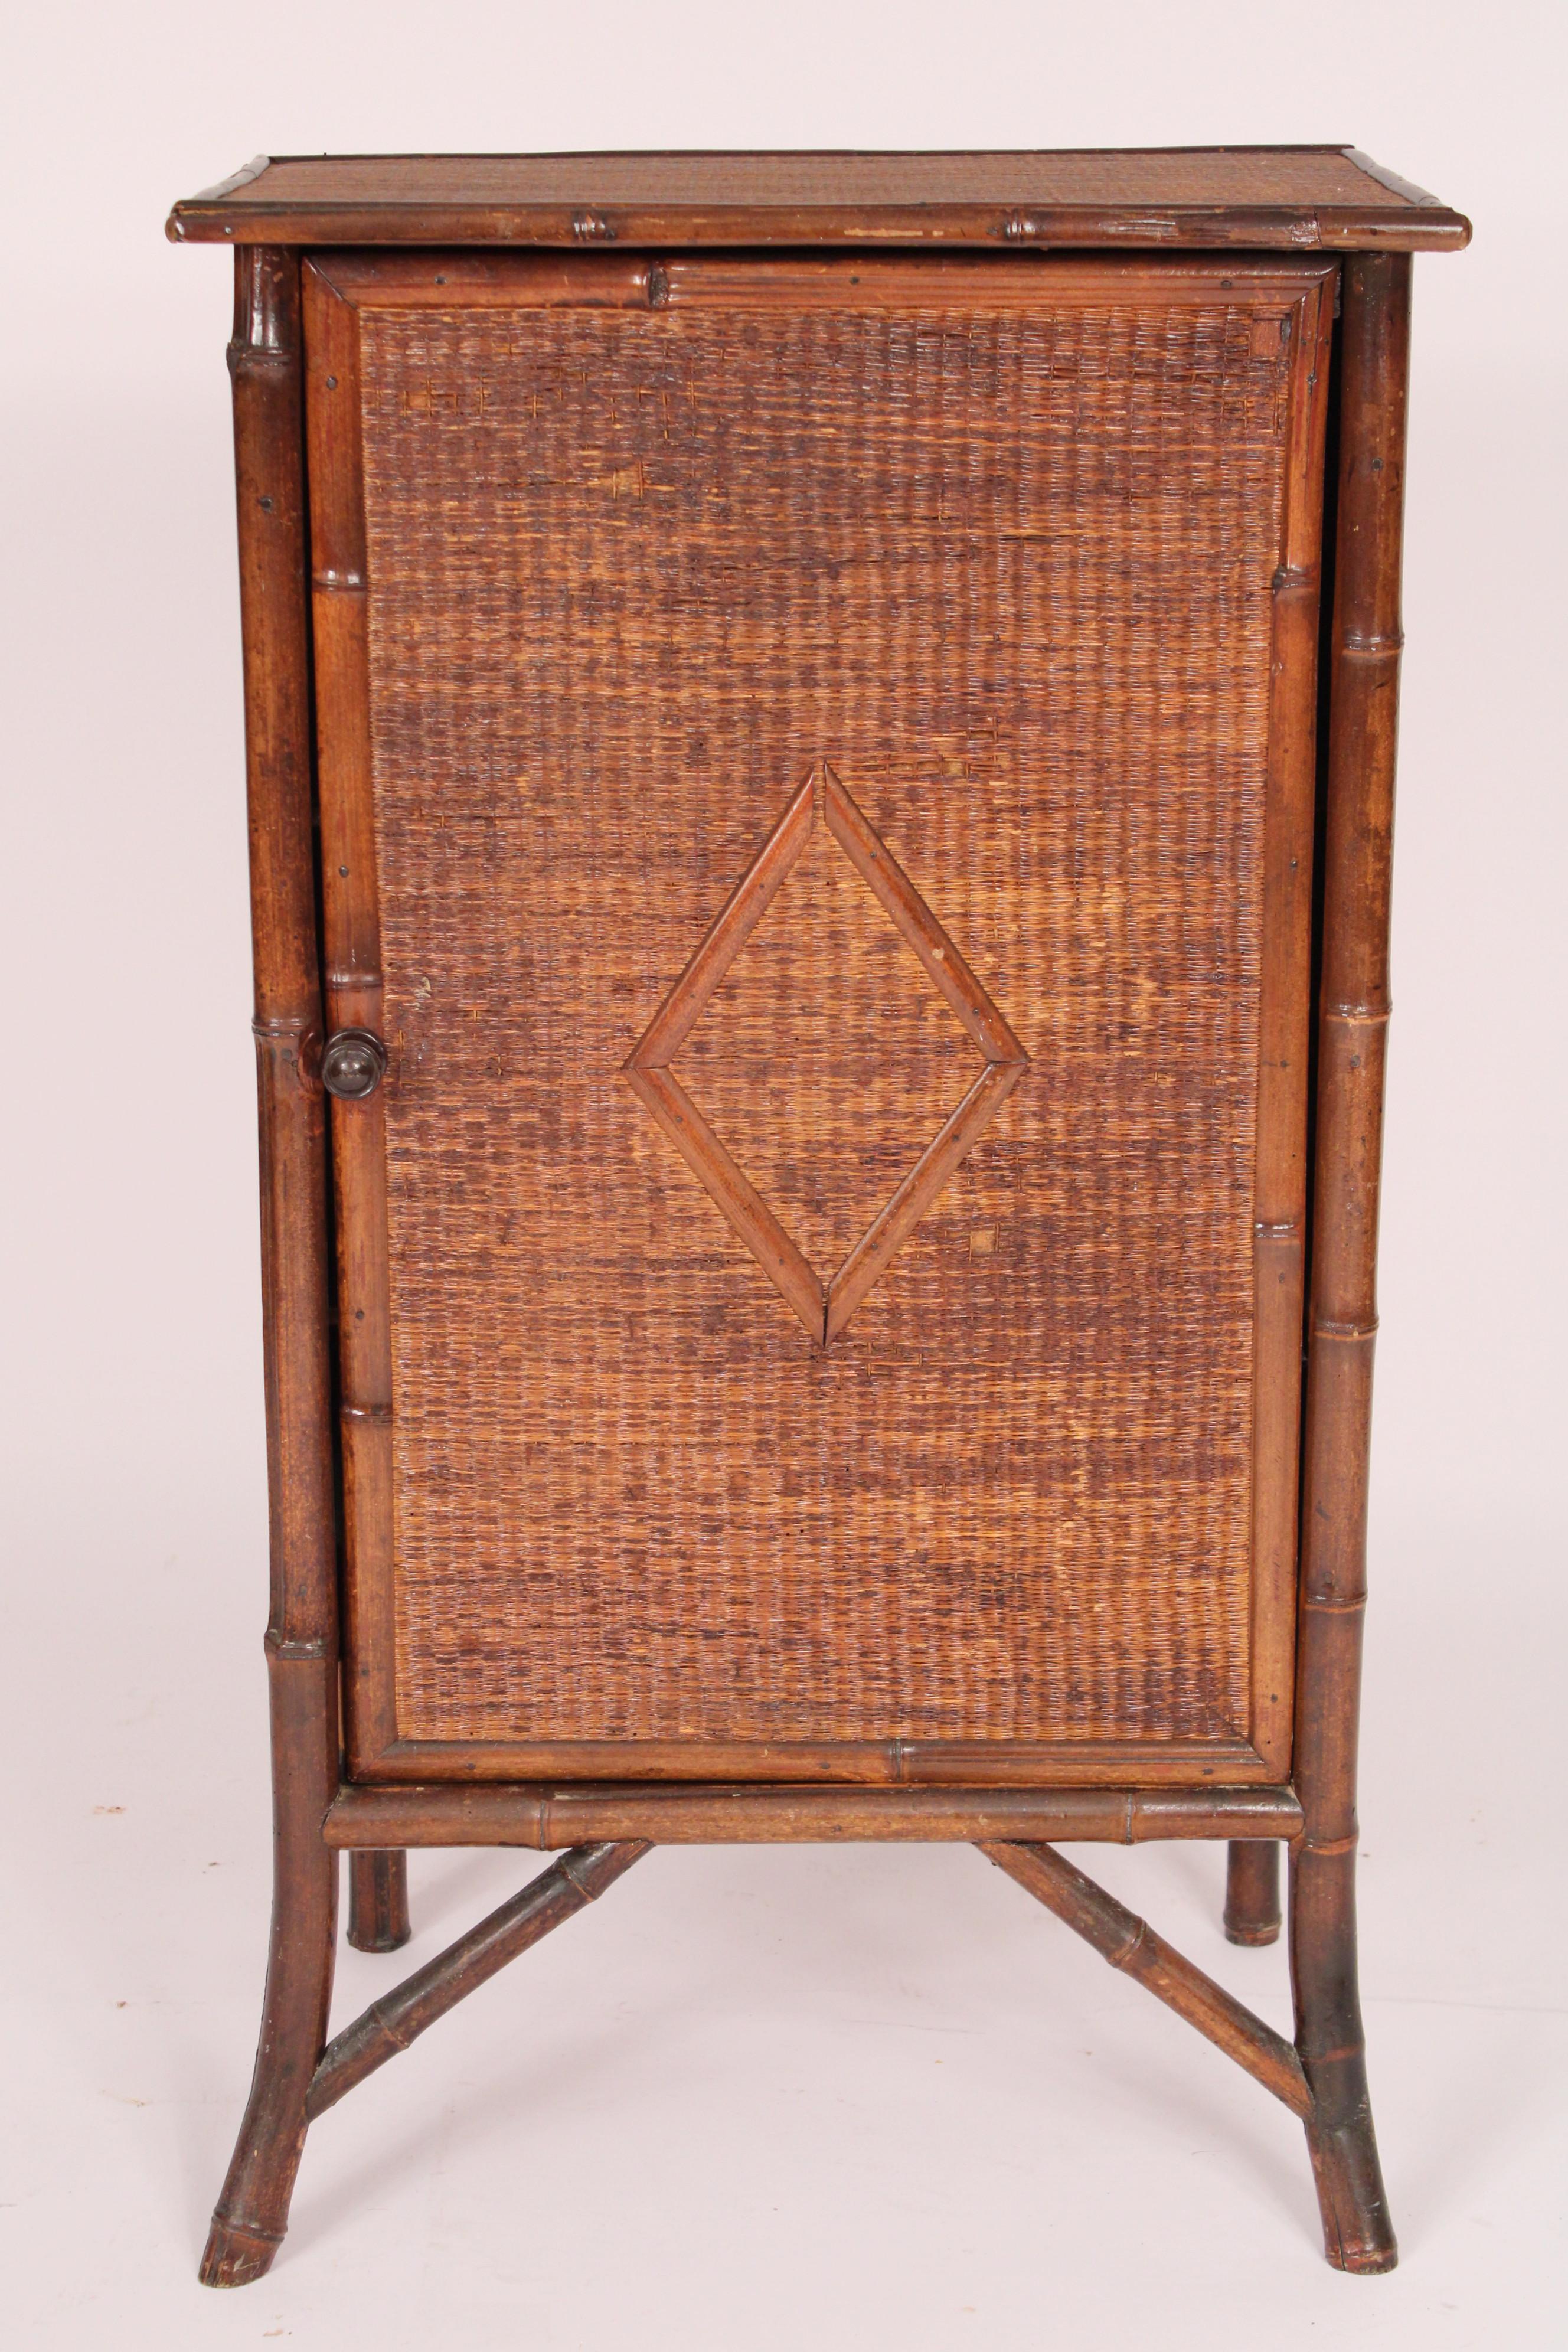 Bamboo and rattan single door cabinet, circa 1930s. With an overhanging rattan top with bamboo borders, single door with central diamond design, interior with 3 shelves, splayed legs with bracing.